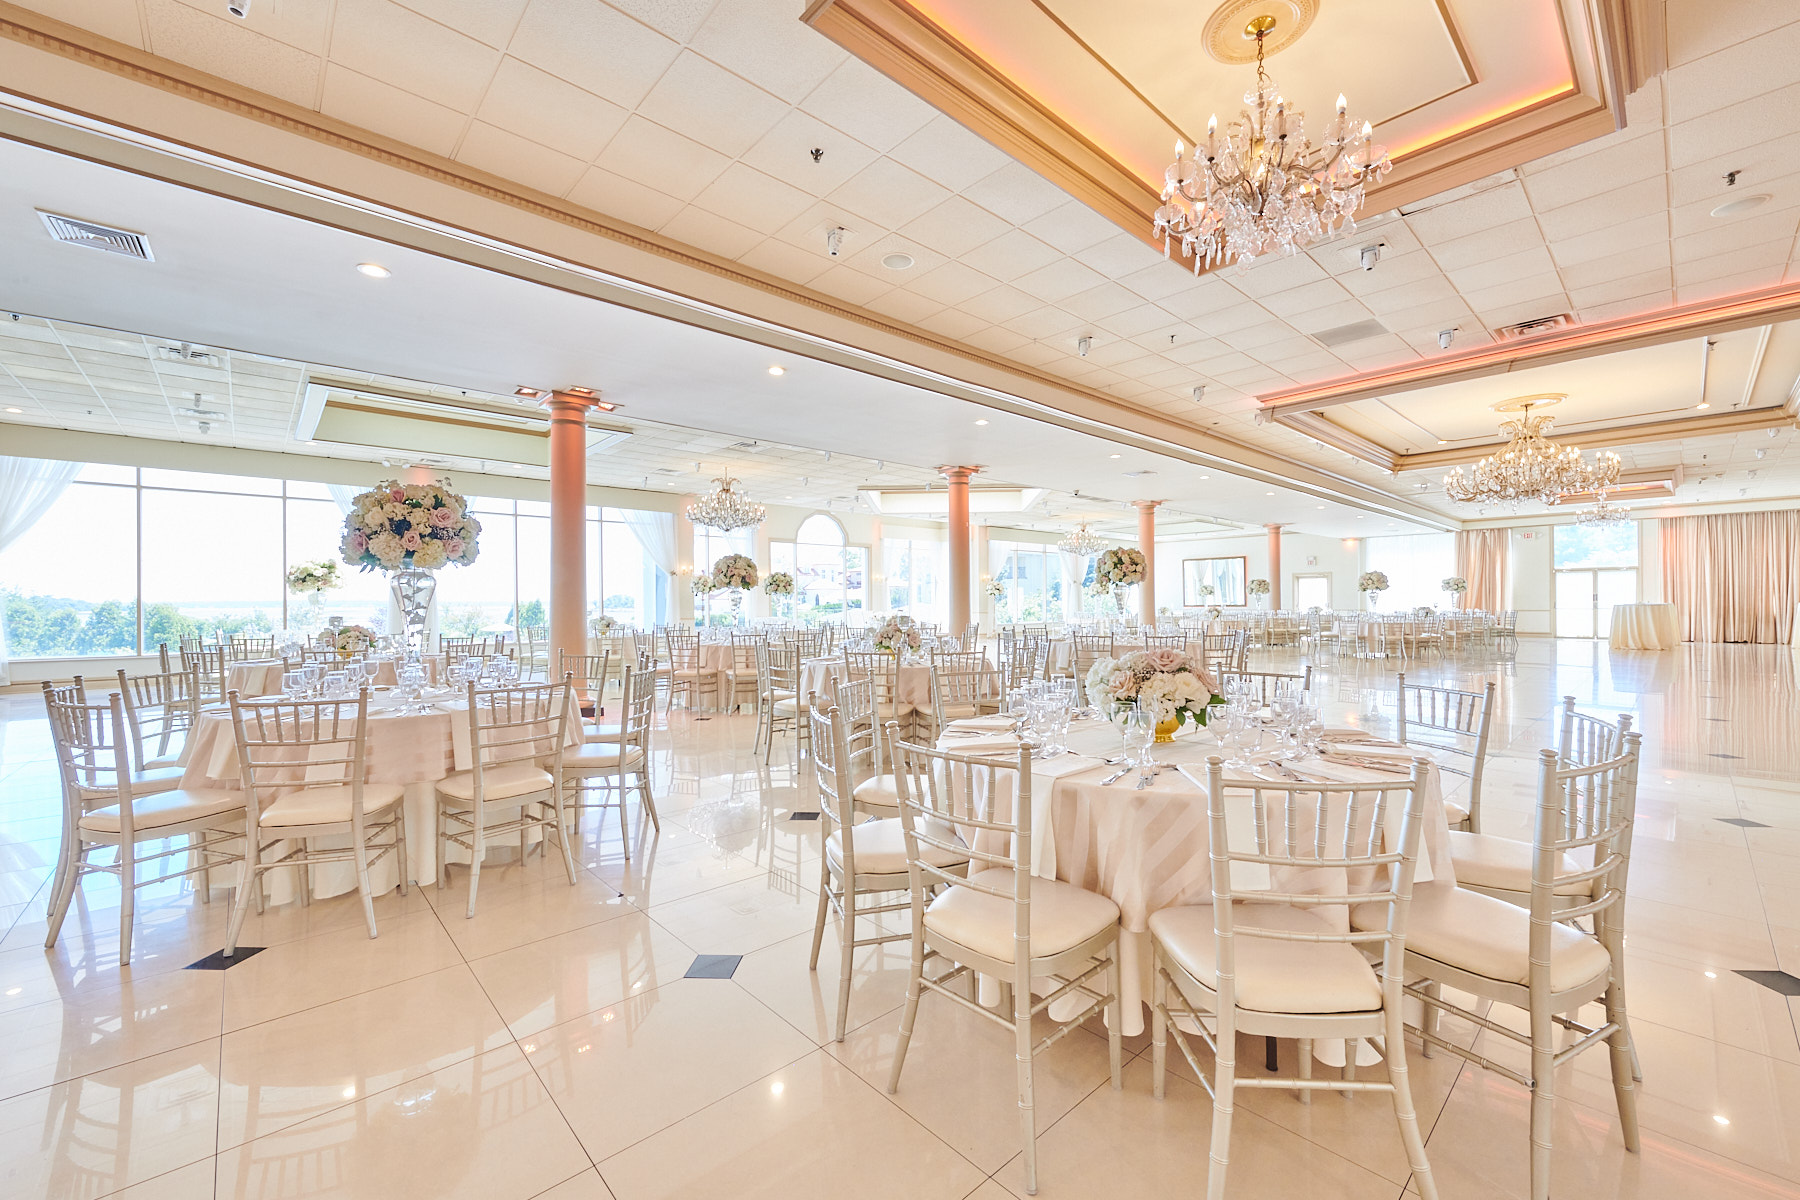 Photograph of the Grand Ballroom inside Greentree Country Club